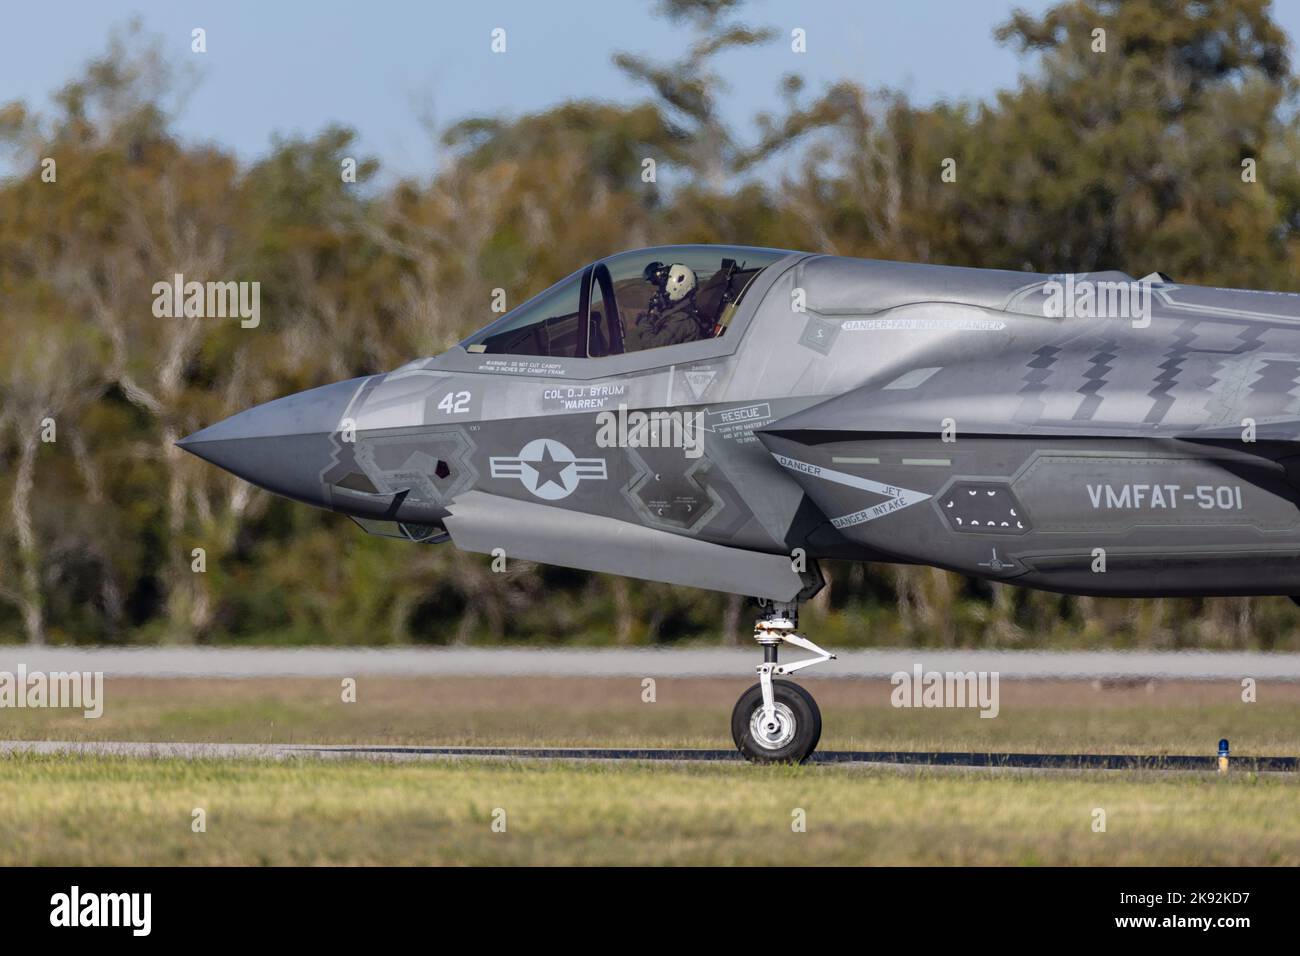 British Royal Navy Lt. Chris Avison, an F-35B Lightning II fighter jet pilot with Marine Fighter Attack Training Squadron (VMFAT) 501, taxis an F-35B Lightning II fighter jet at Naval Air Station Joint Reserve Base New Orleans, Louisiana, Oct. 24, 2022. VMFAT-501 deployed to NAS JRB New Orleans to increase entry-level pilots' proficiency in offensive-air support, electronic warfare, and routine flight operations for their future fleet assignments. VMFAT-501 is a subordinate unit of 2nd Marine Aircraft Wing, the aviation combat element of II Marine Expeditionary Force. (U.S. Marine Corps photo Stock Photo